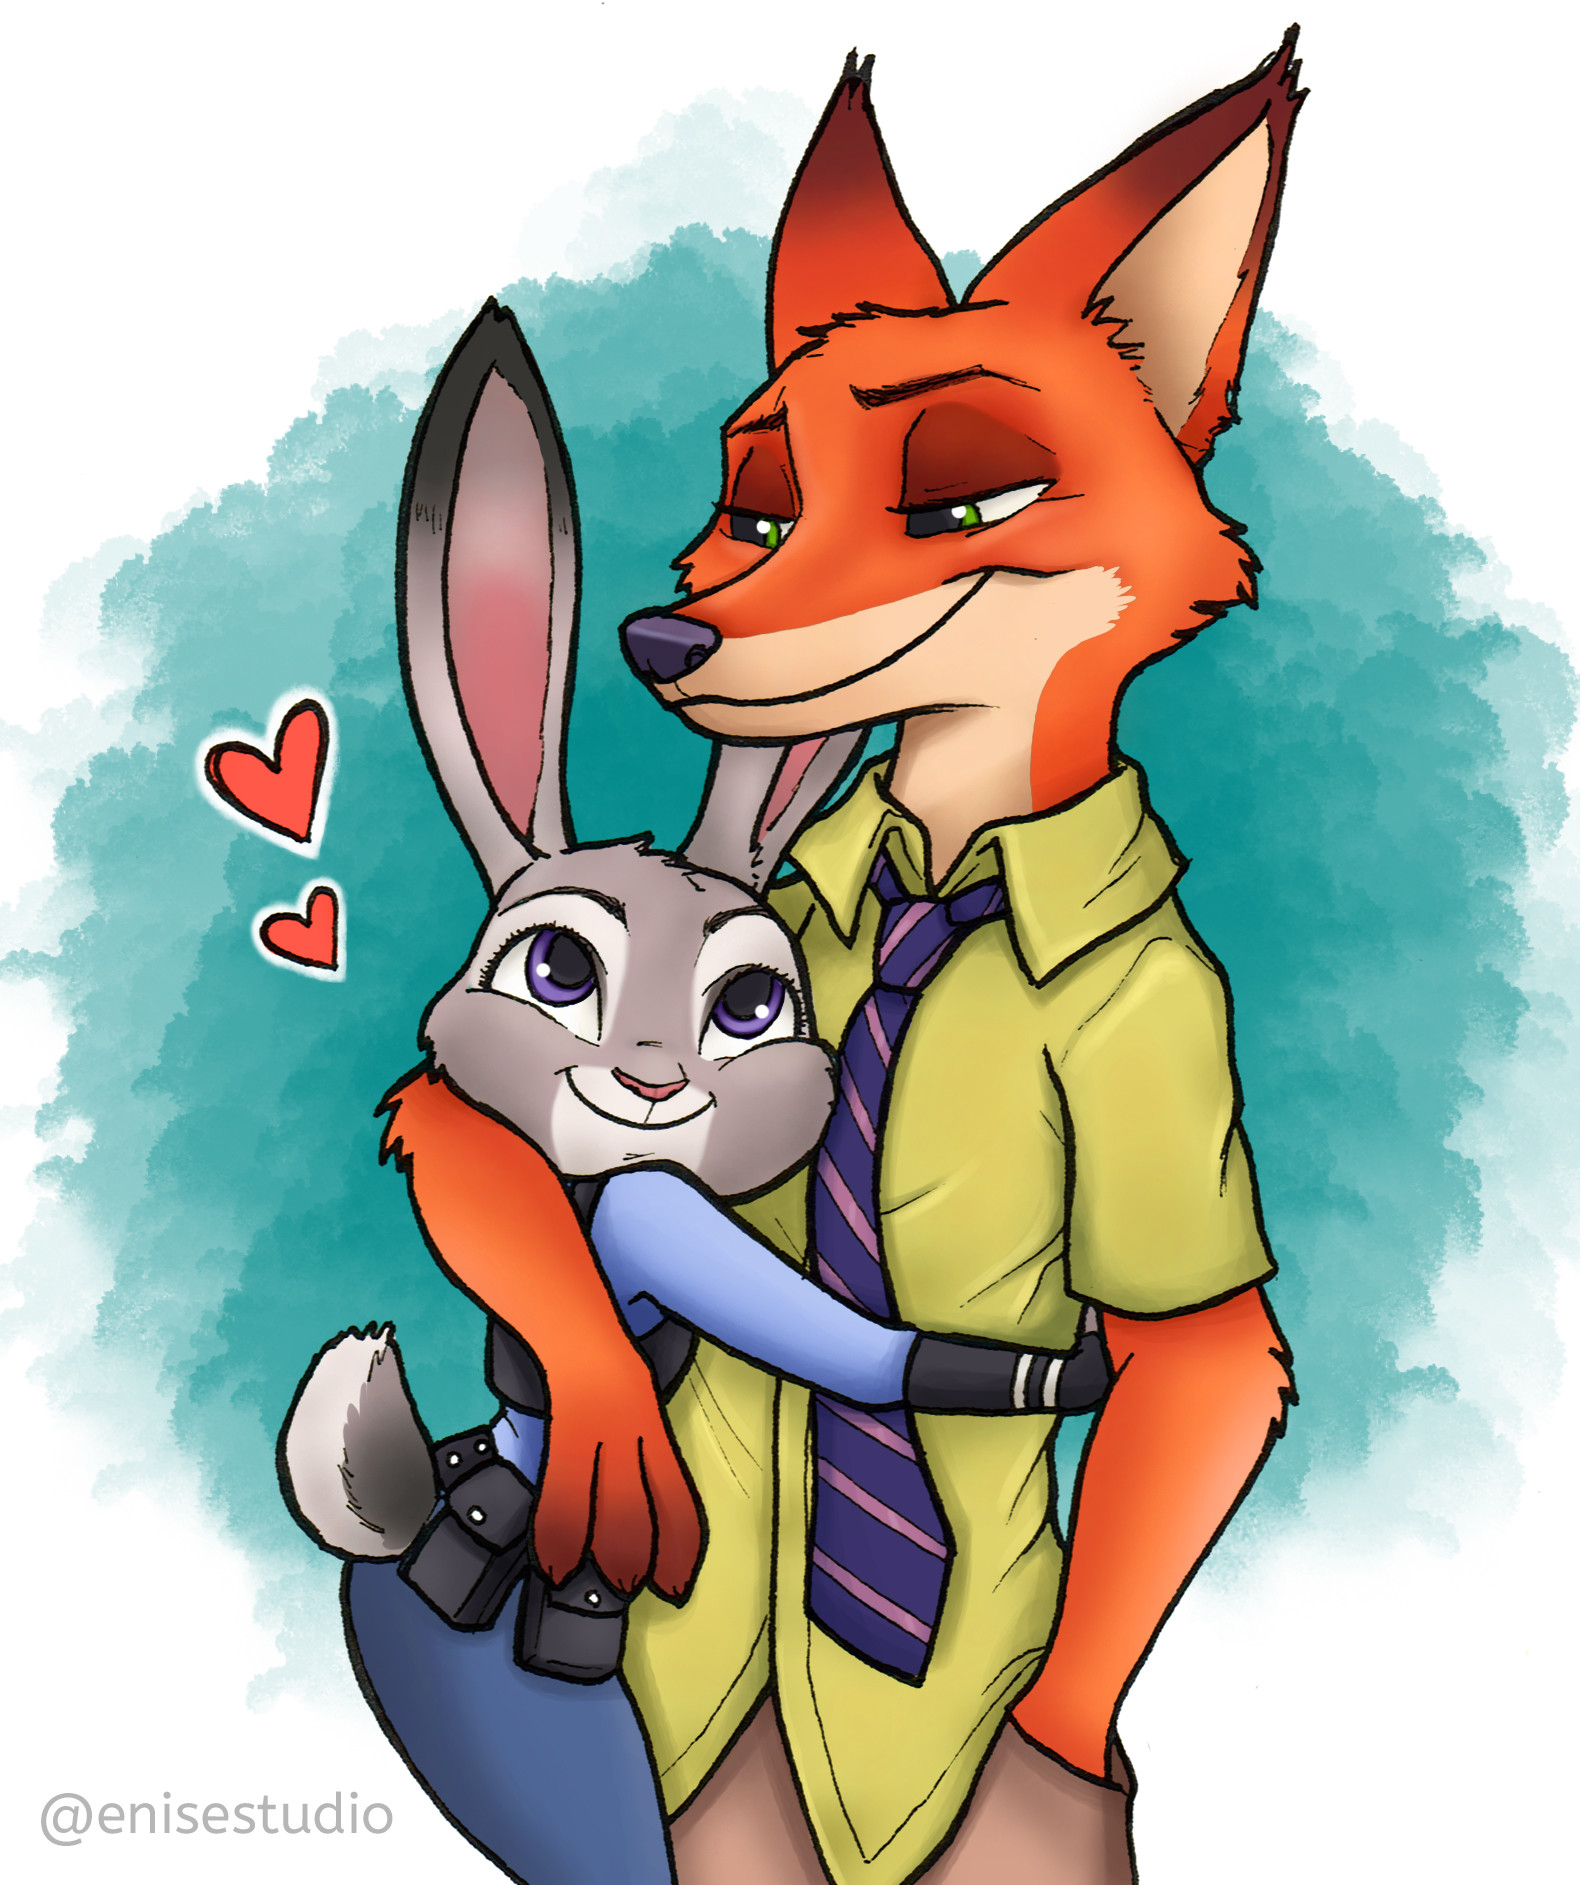 Judy and Nick of Zootopia.